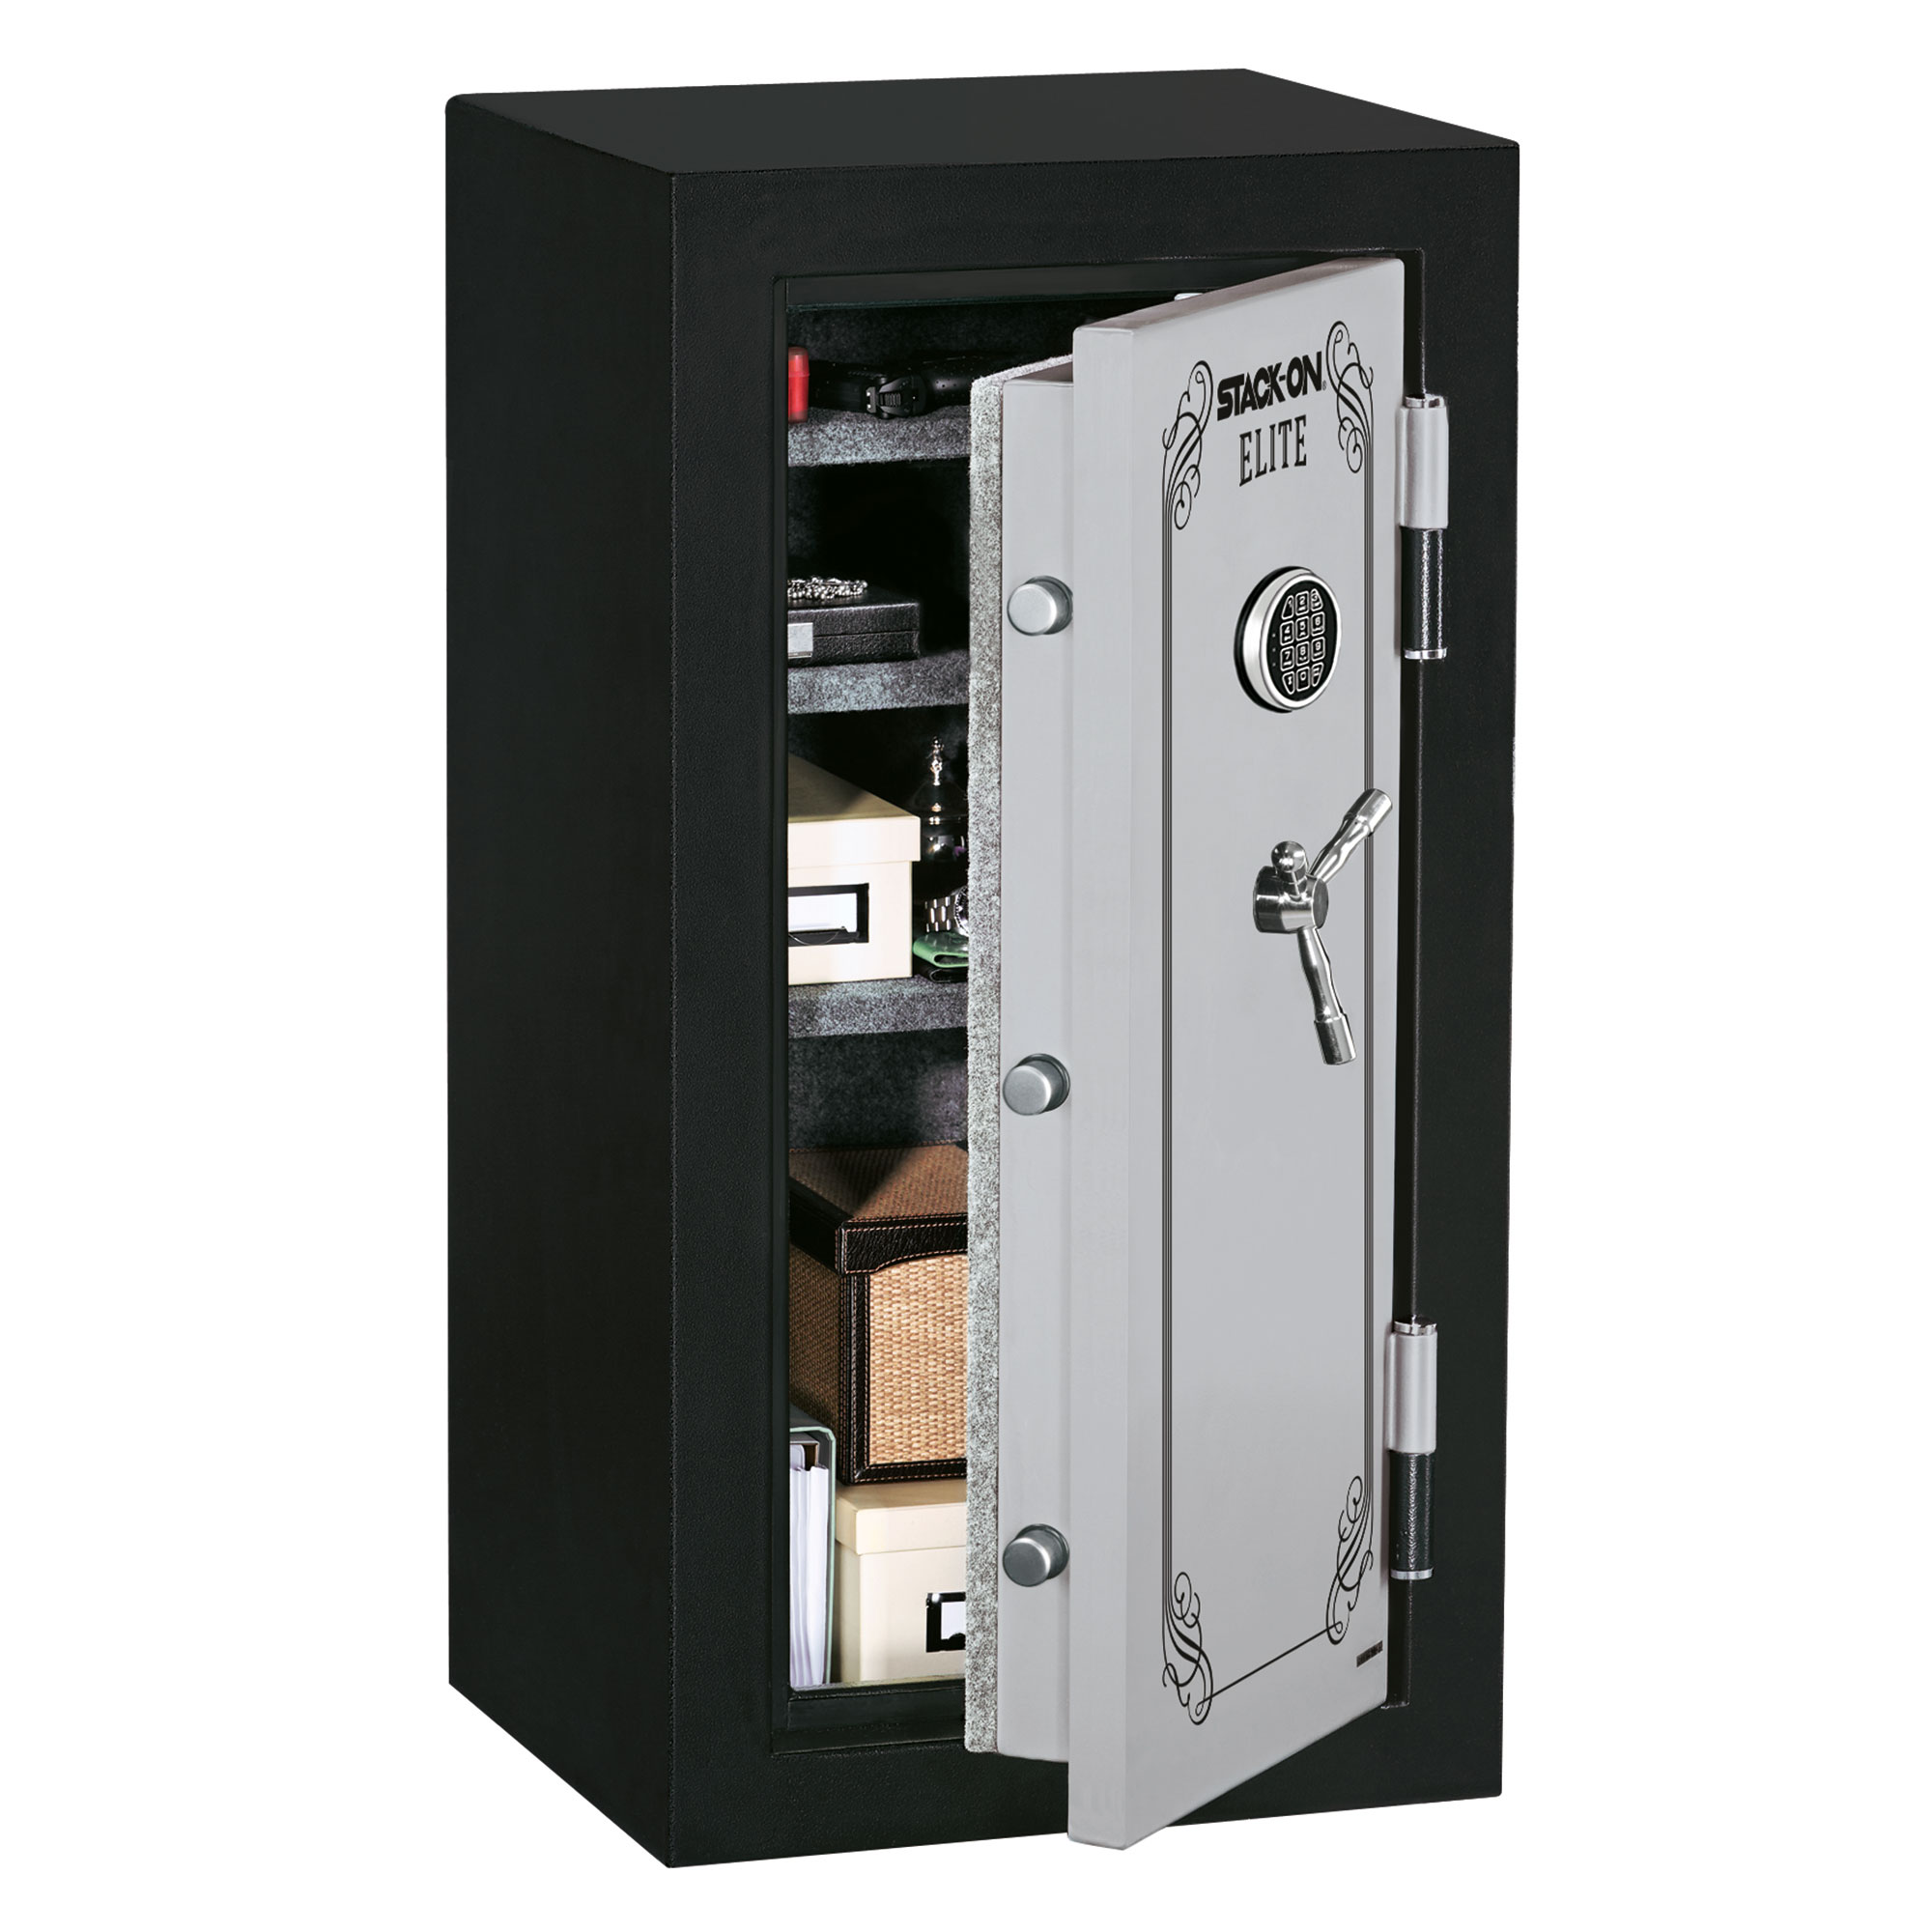 Eco-conscious and budget-friendly living and thirst for adventure are fueling interest in small homes and RV life. A Stack-On Personal Fireproof Safe is a great gift for small-space dwellers.